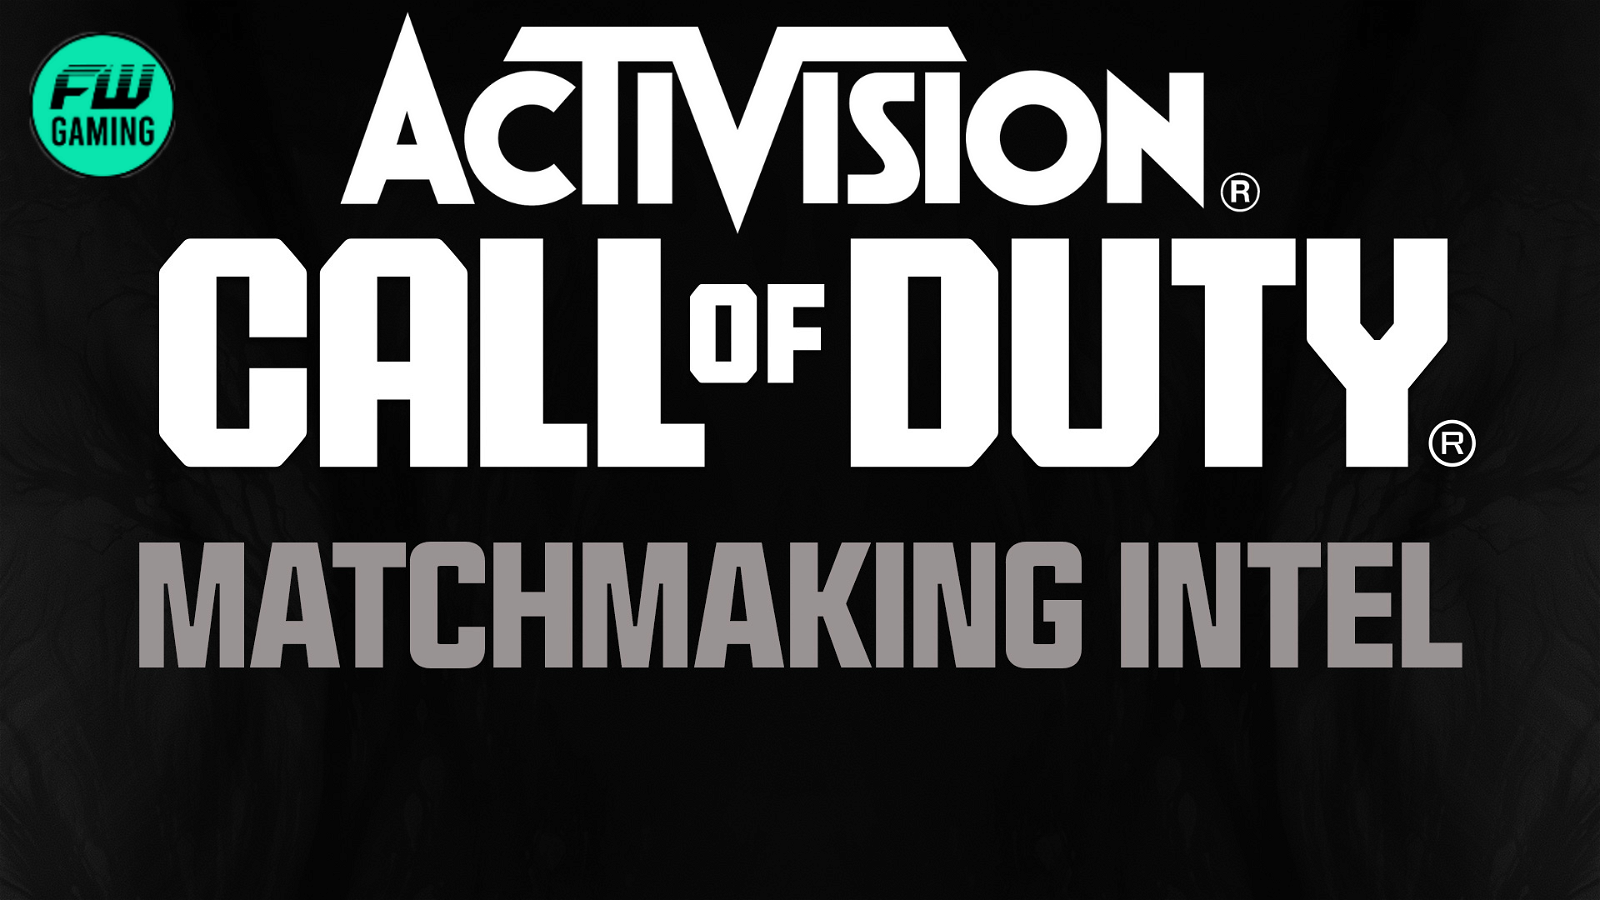 Activision Officially Refutes Popular Theory About Call of Duty's Multiplayer